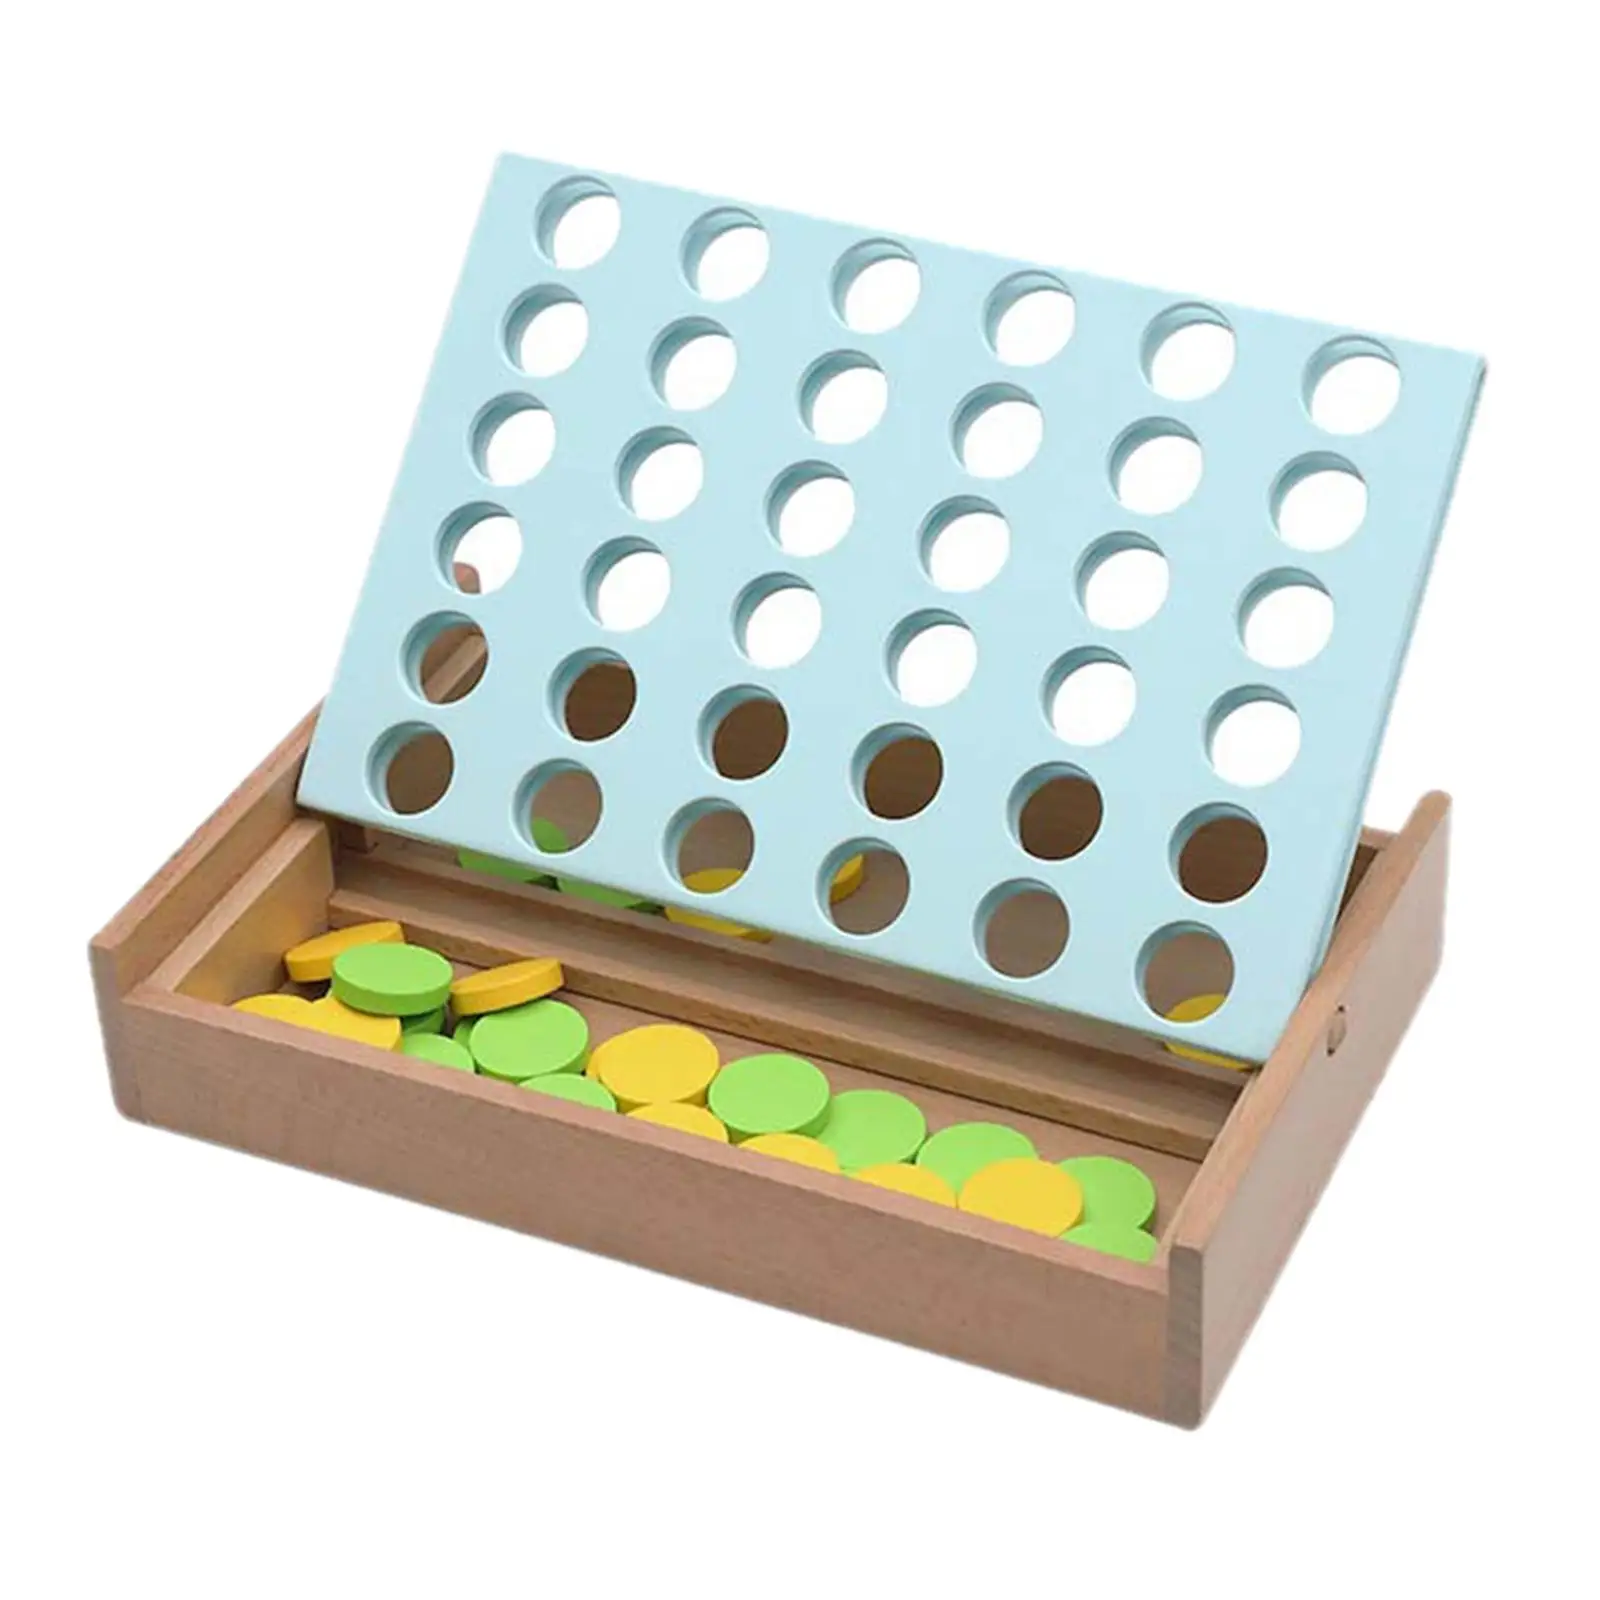 4 in A Row Wooden Board Game Connect Game Classic Strategy Game for Boys Girls Children 3 Years Old Camping Adults